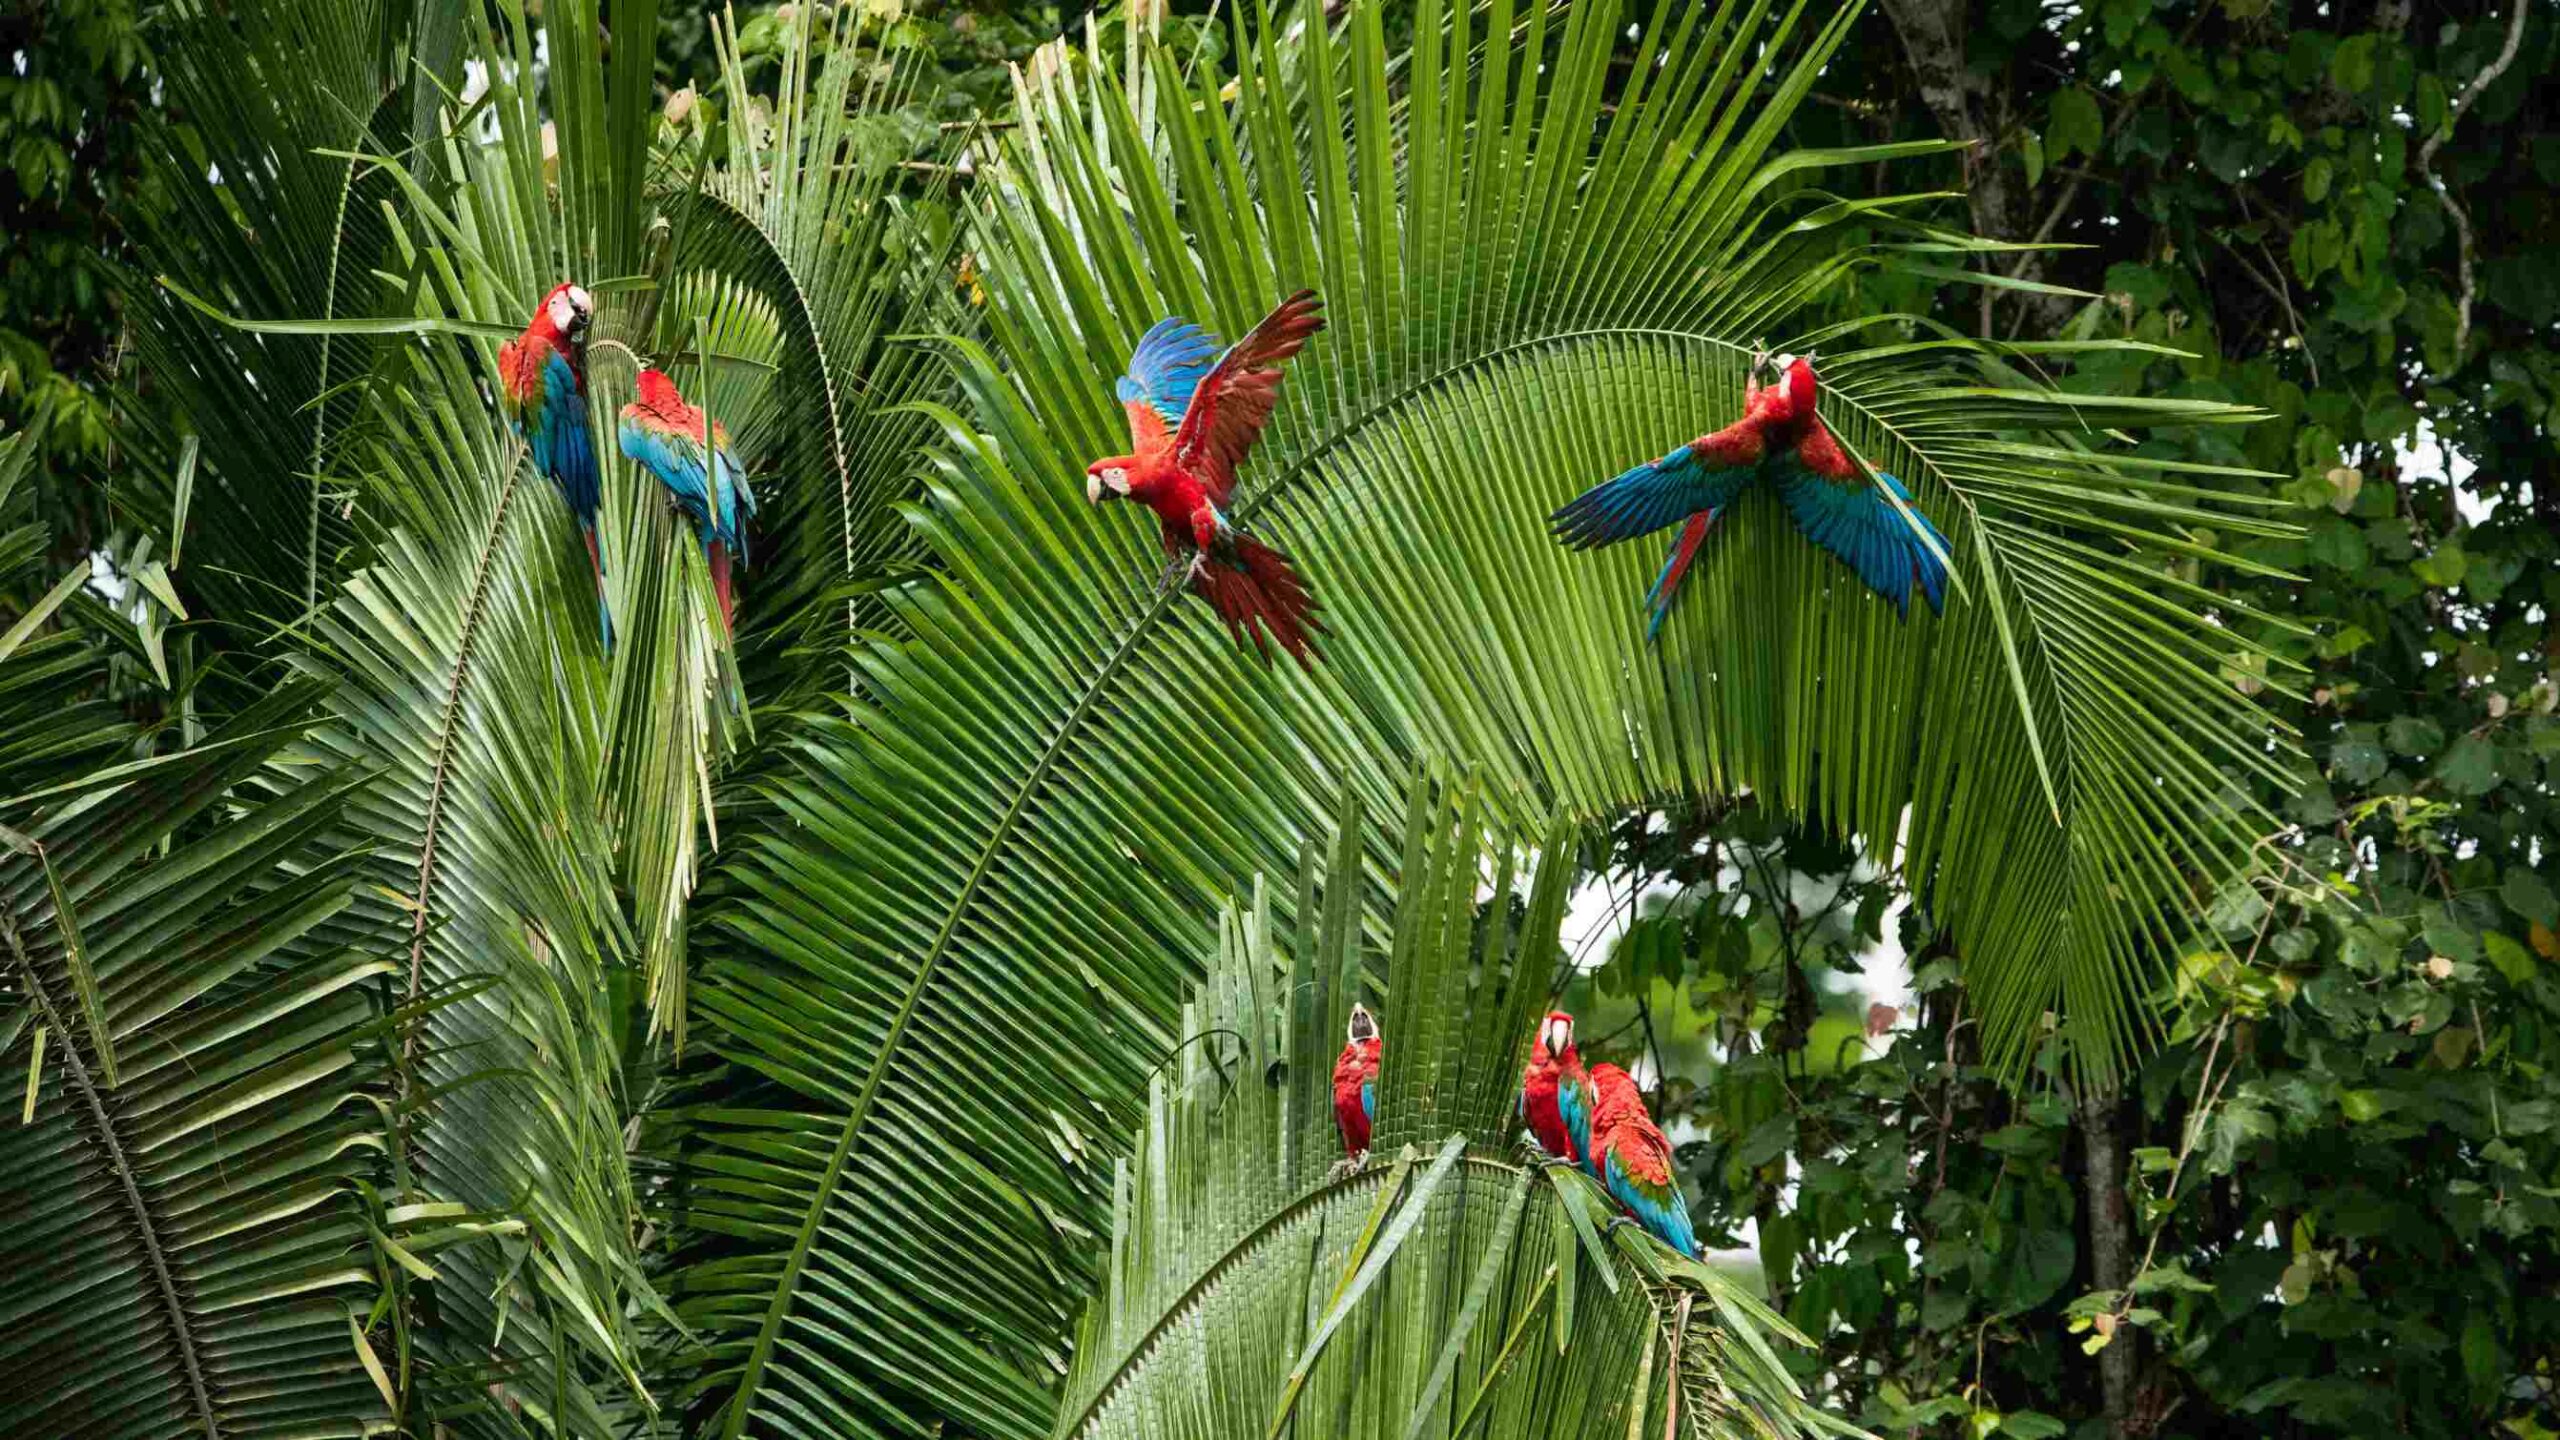 Tambopata Macaw clay lick, the nature´s colorful spectacle